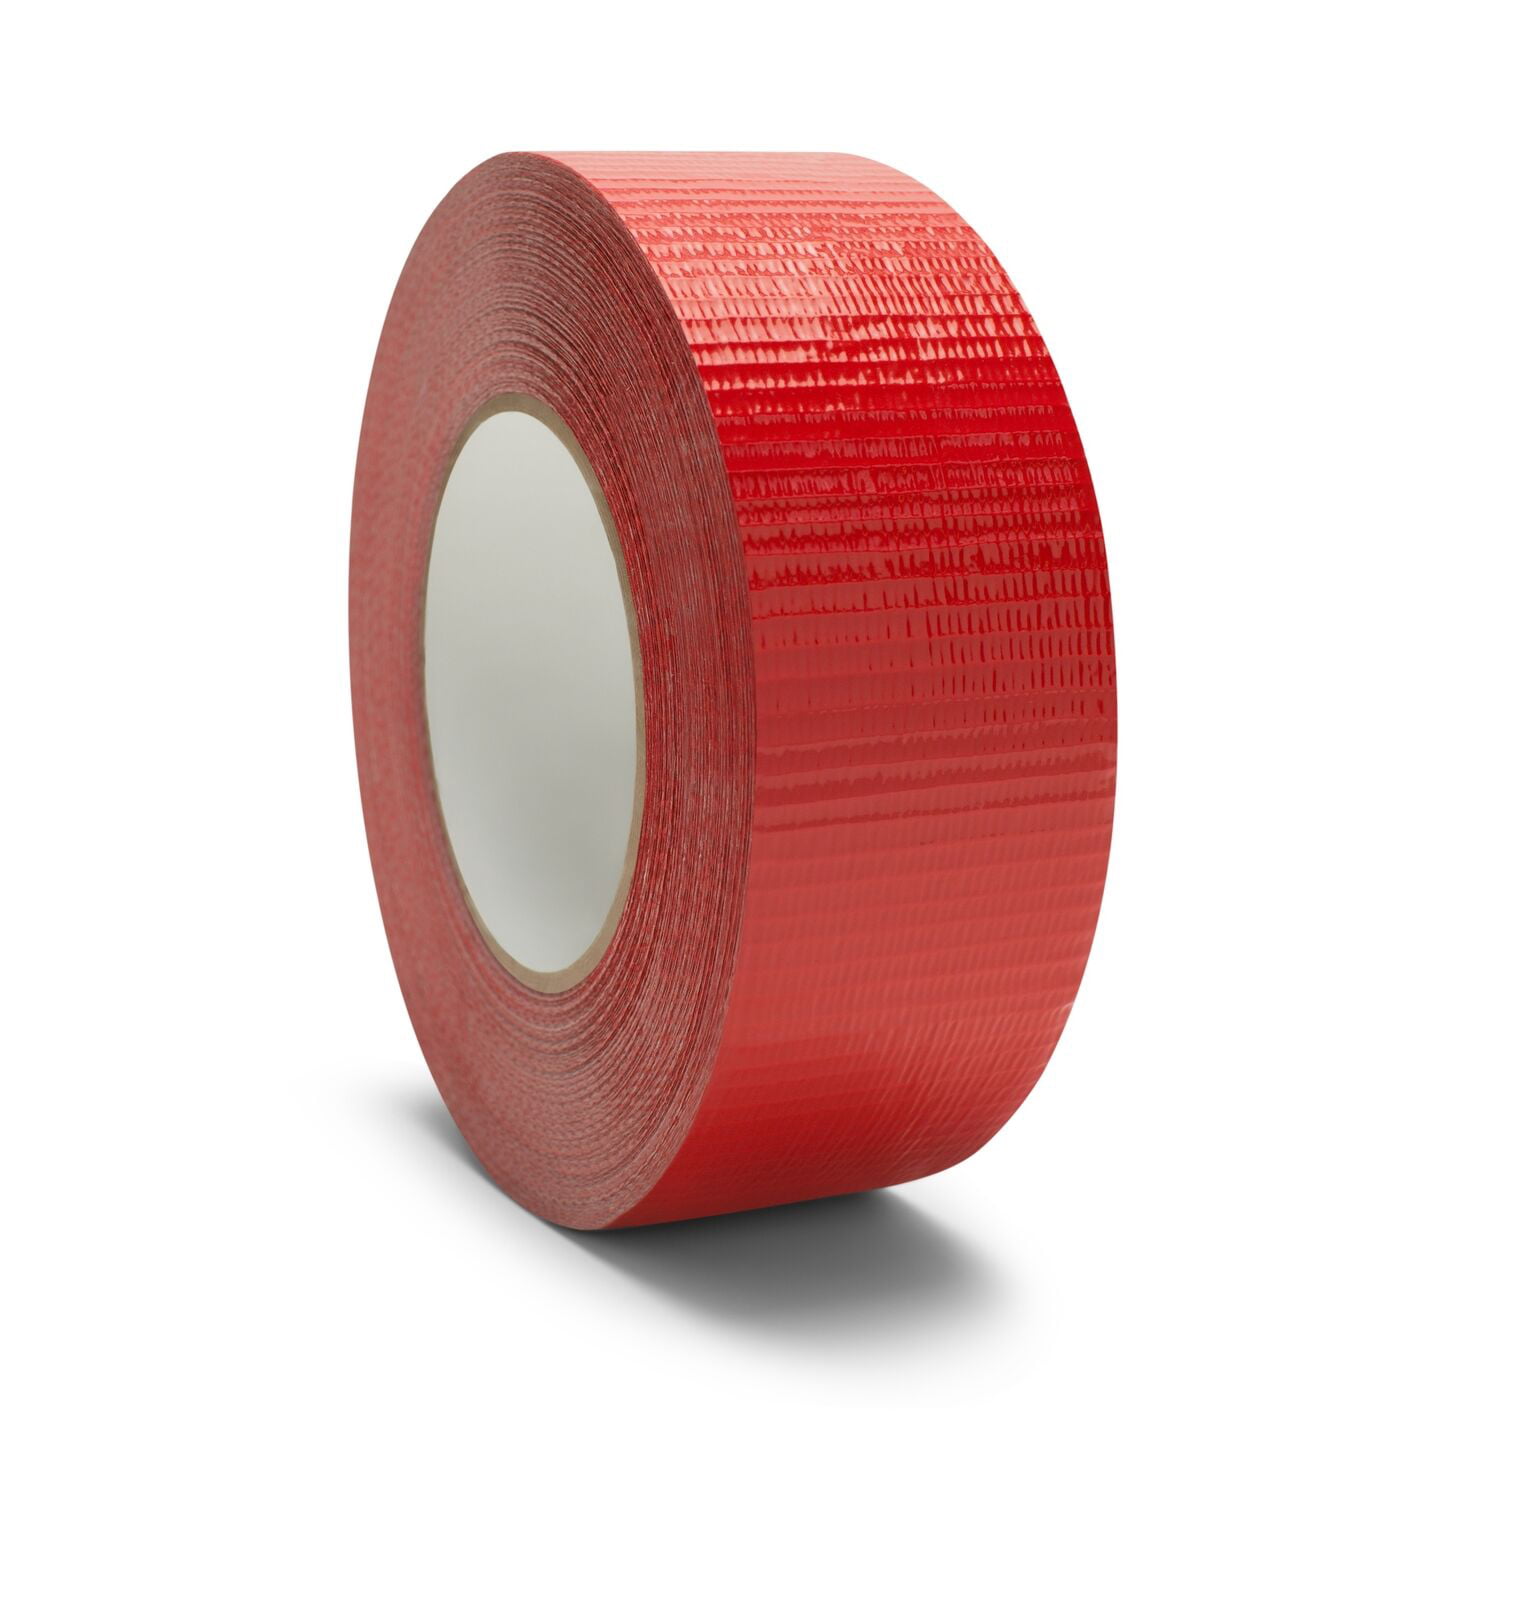 9 Mil Utility Grade Multi Purpose Tapes 2" x 60 Yards Red Duct Tape 48 Rolls 